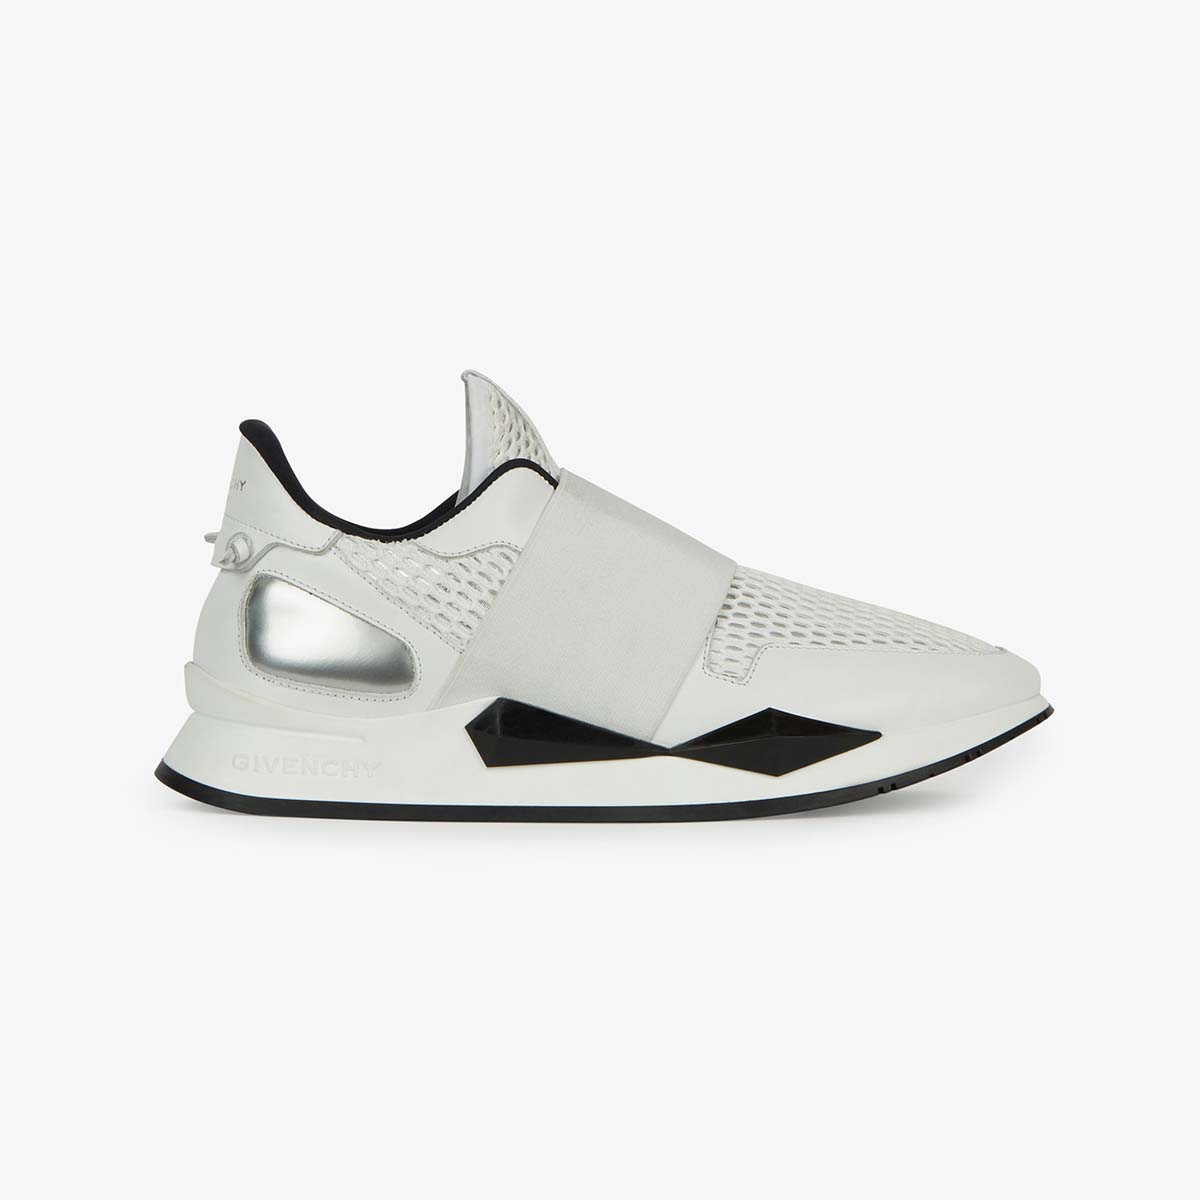 Givenchy Women Elastic Strap Sneakers in Suede and Leather Shoes White